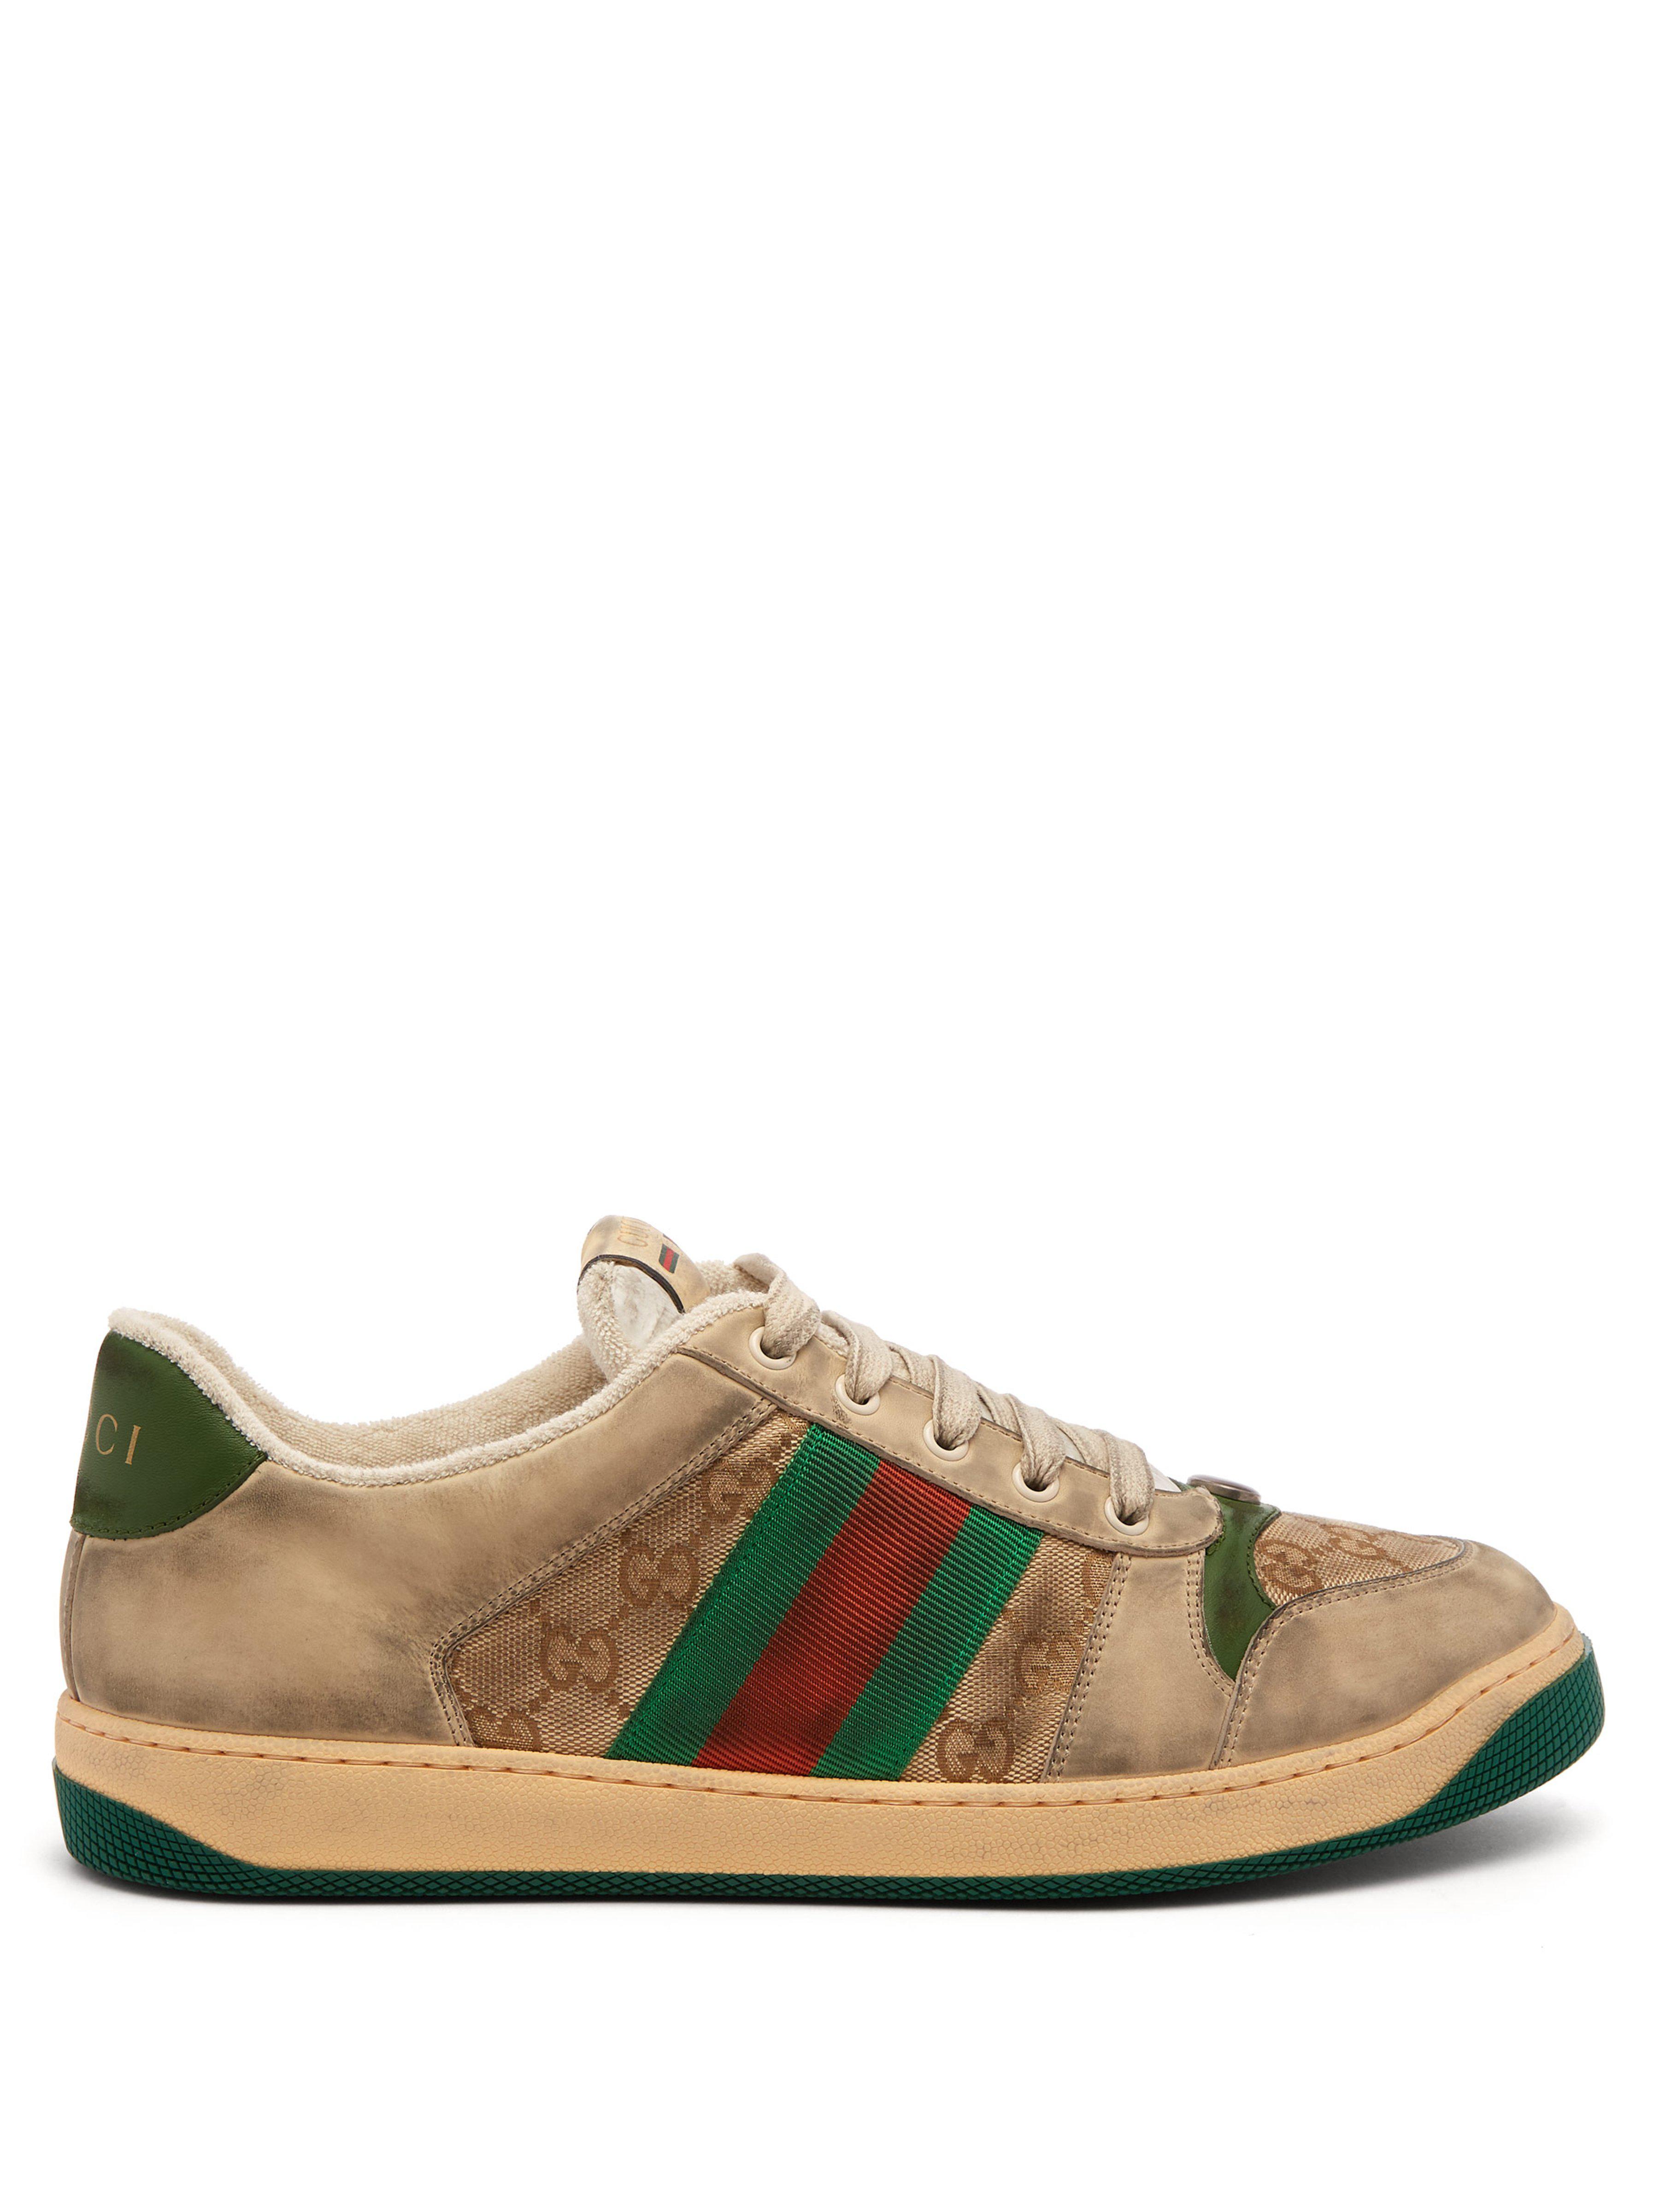 Gucci Screener Leather Trainers for Men - Lyst